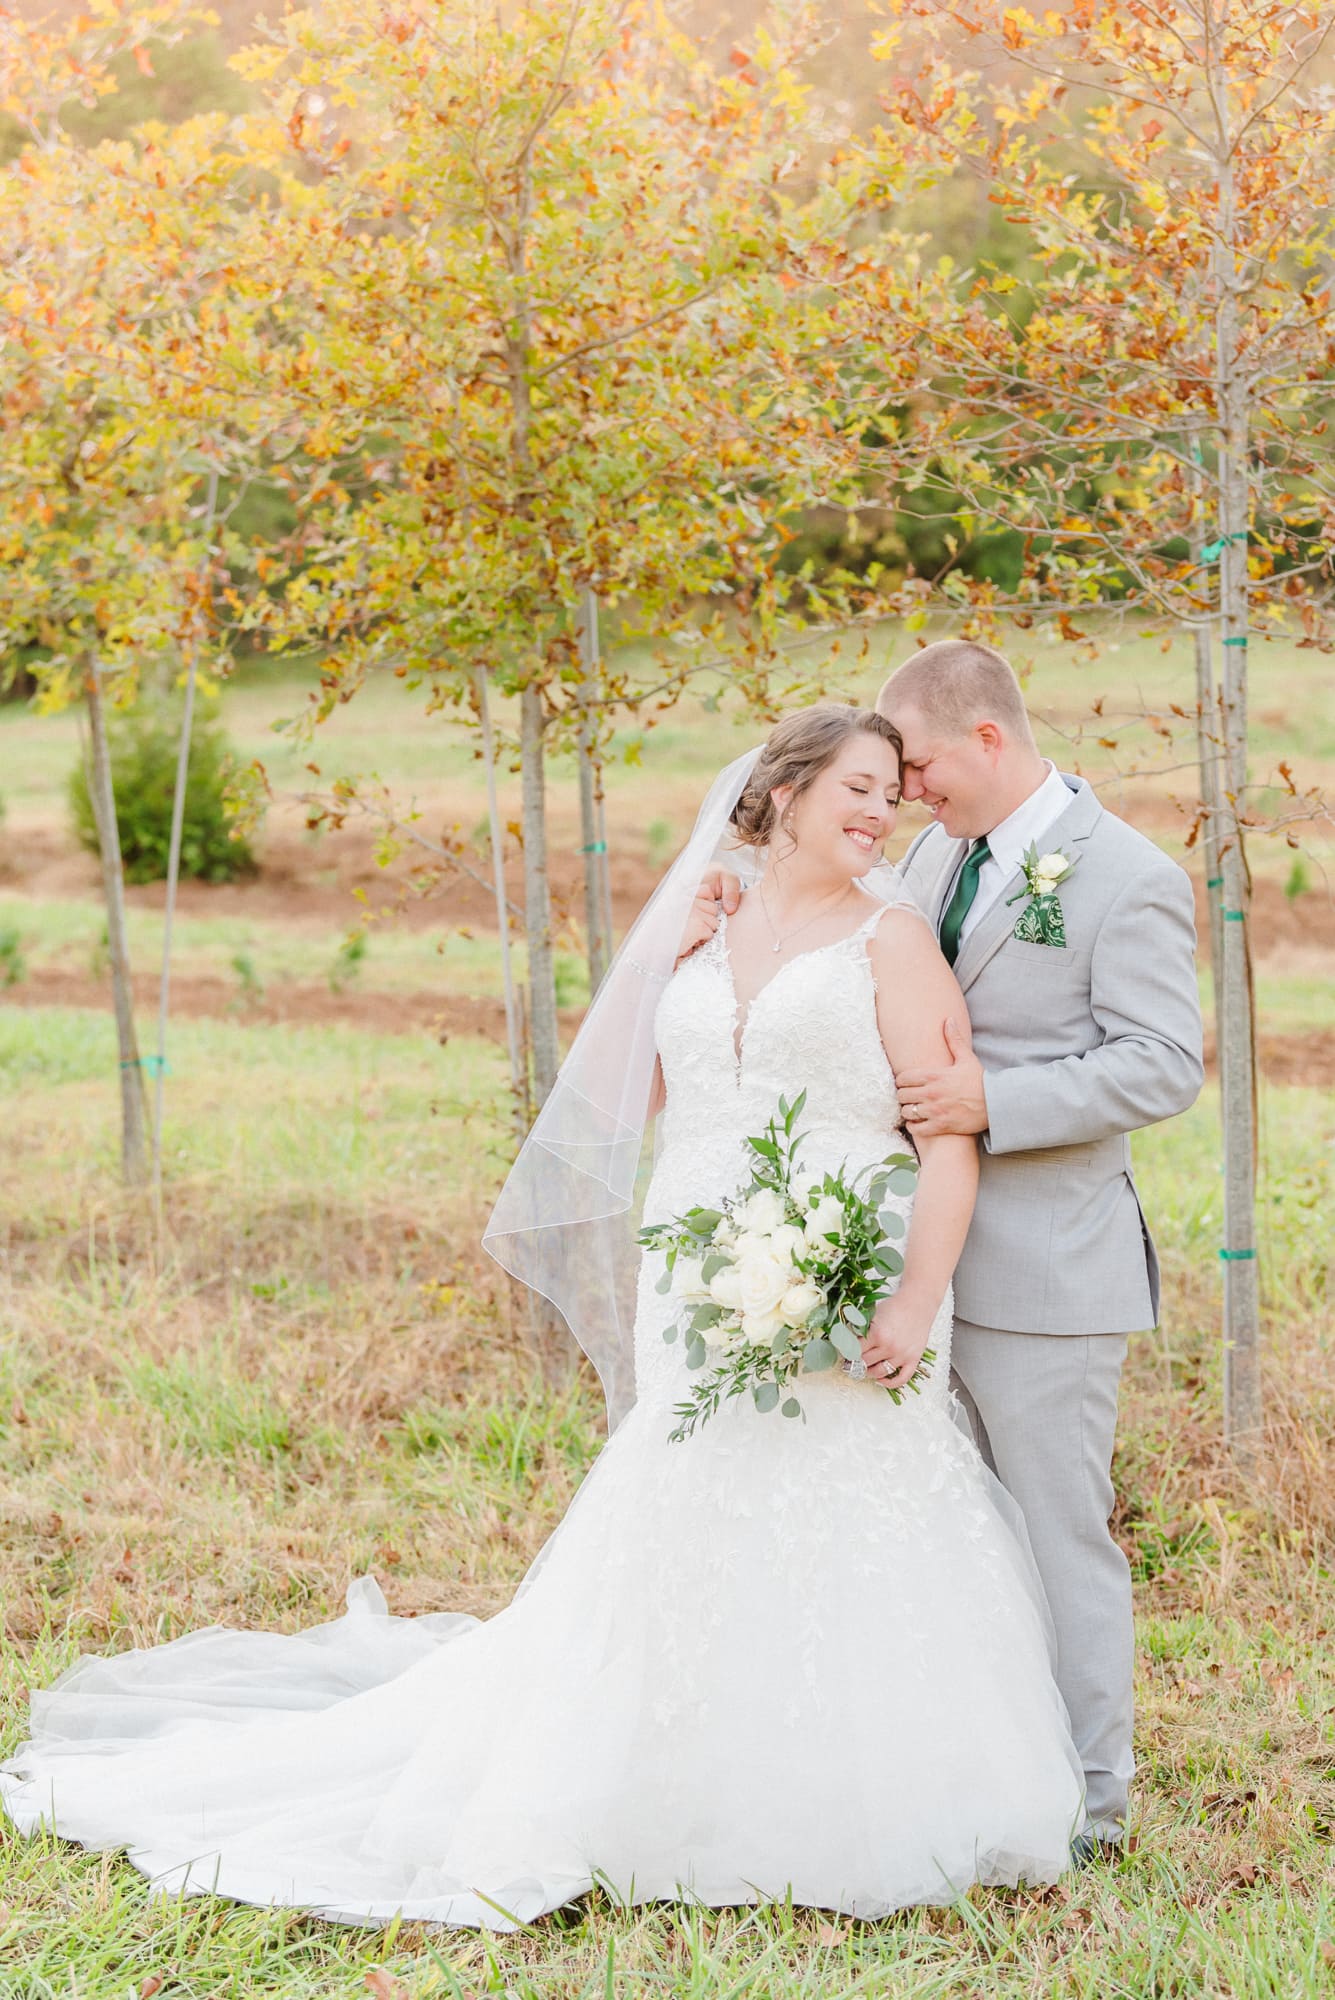 Low Meadows Estate has young trees that change with the fall colors. The bridal couple smiles and holds each other in front of them.